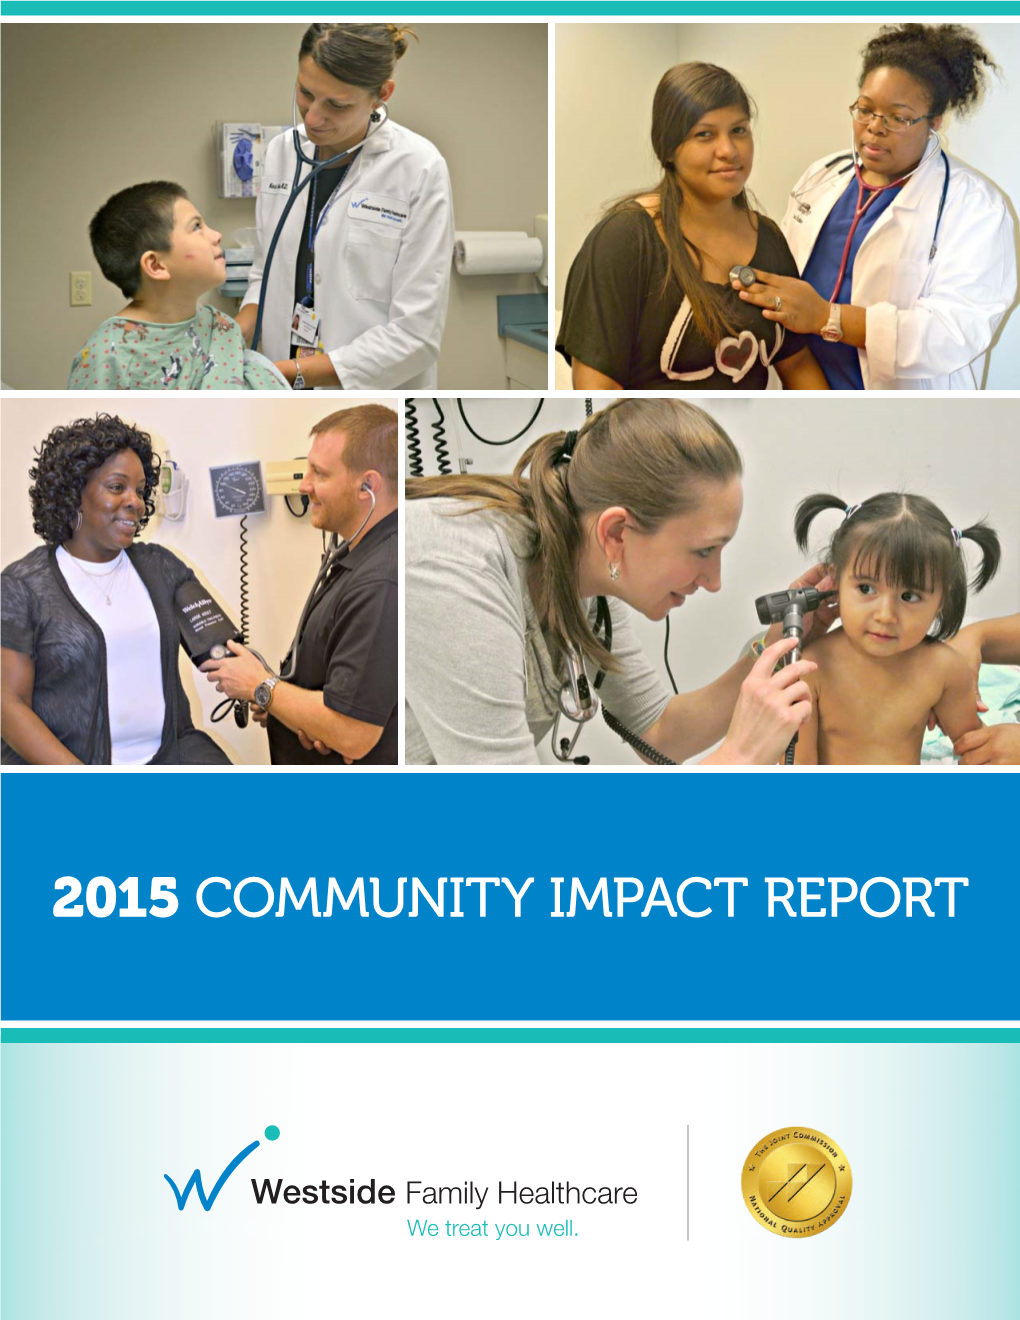 2015 Community Impact Report an Enduring Legacy